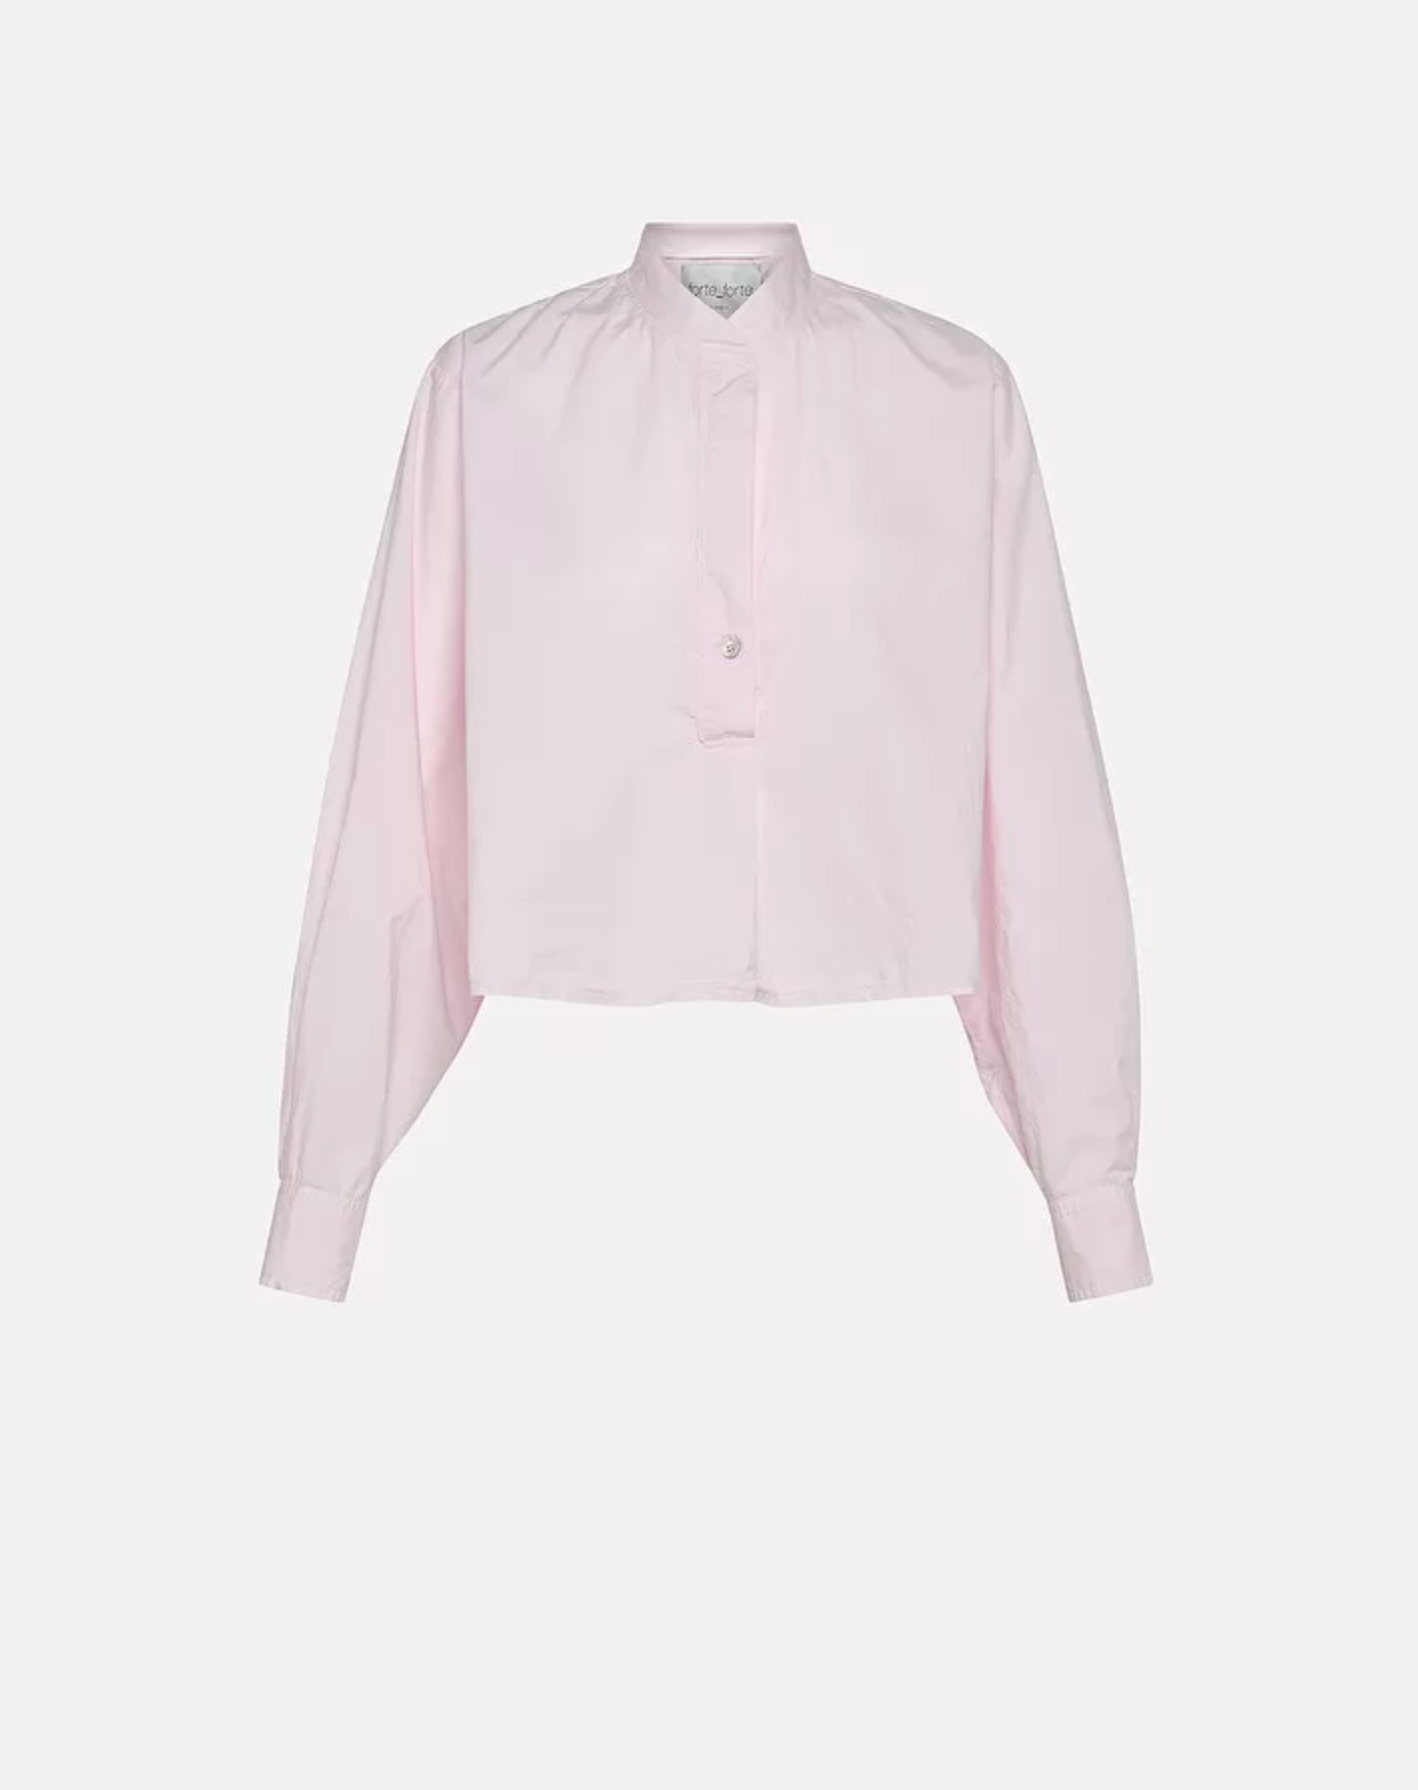 Forte Forte 23SS shirt pink white 09